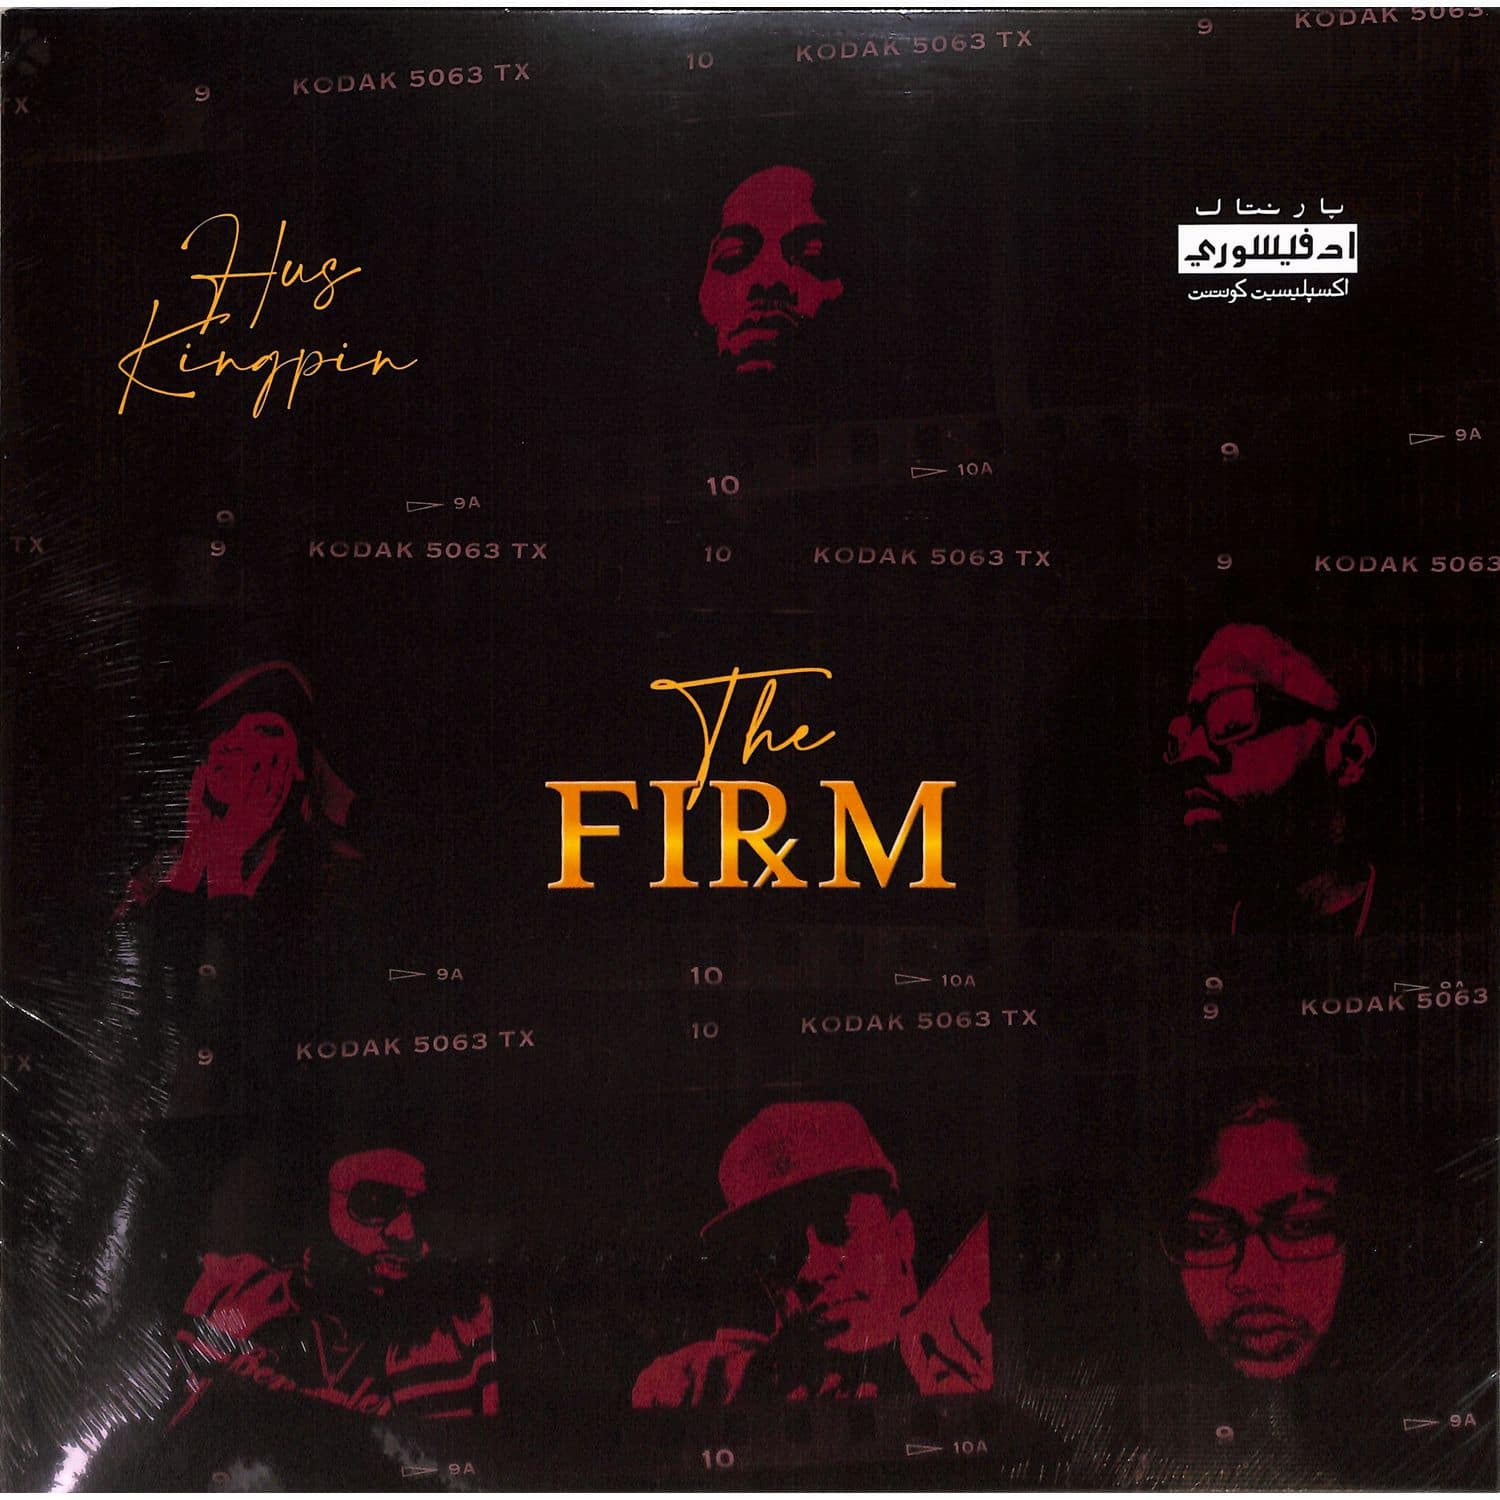 Hus Kingpin - THE FIRM 